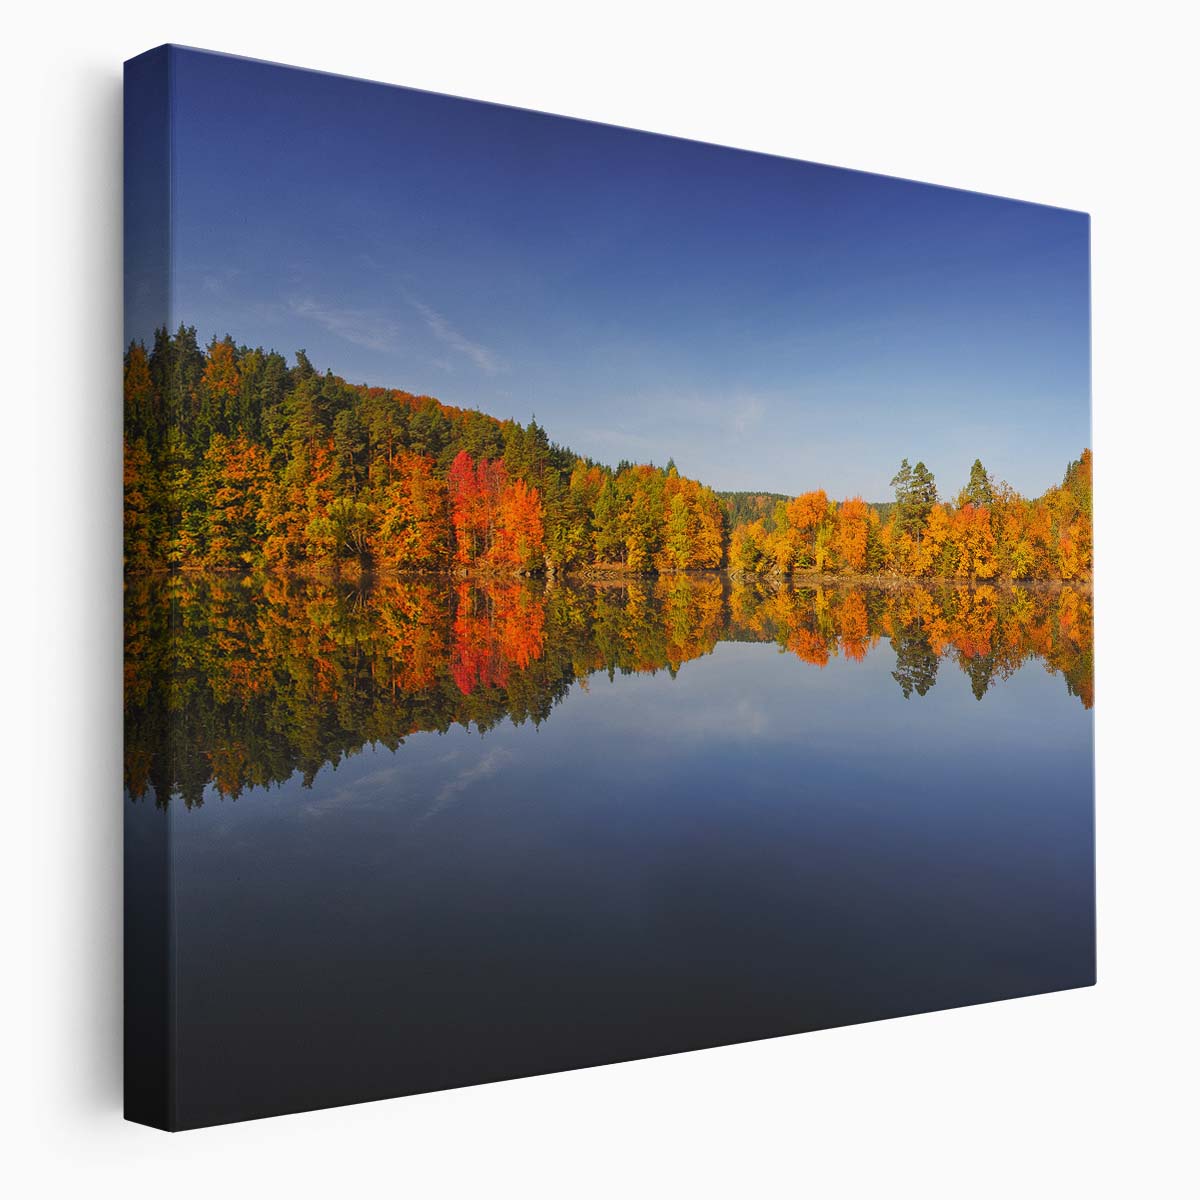 Colorful Autumn Lake & Forest Panorama Wall Art by Luxuriance Designs. Made in USA.